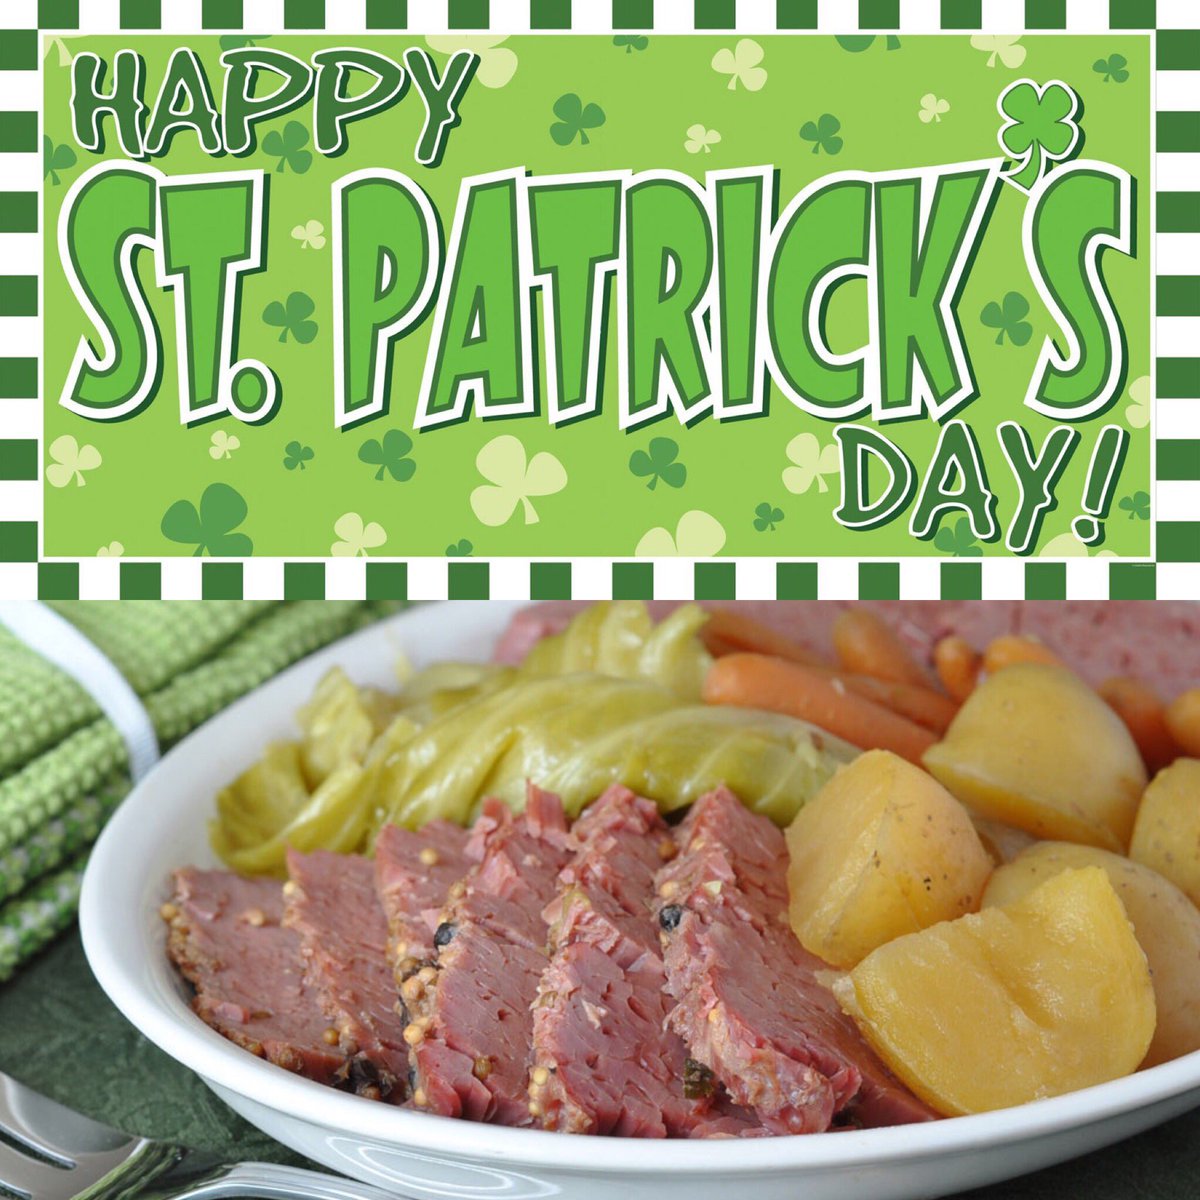 Dinner Special for Saint Patrick’s Day is Corned Beef and Cabbage #hollywooddistrict #oregoncraftbeer #brewery #beef #dinner #